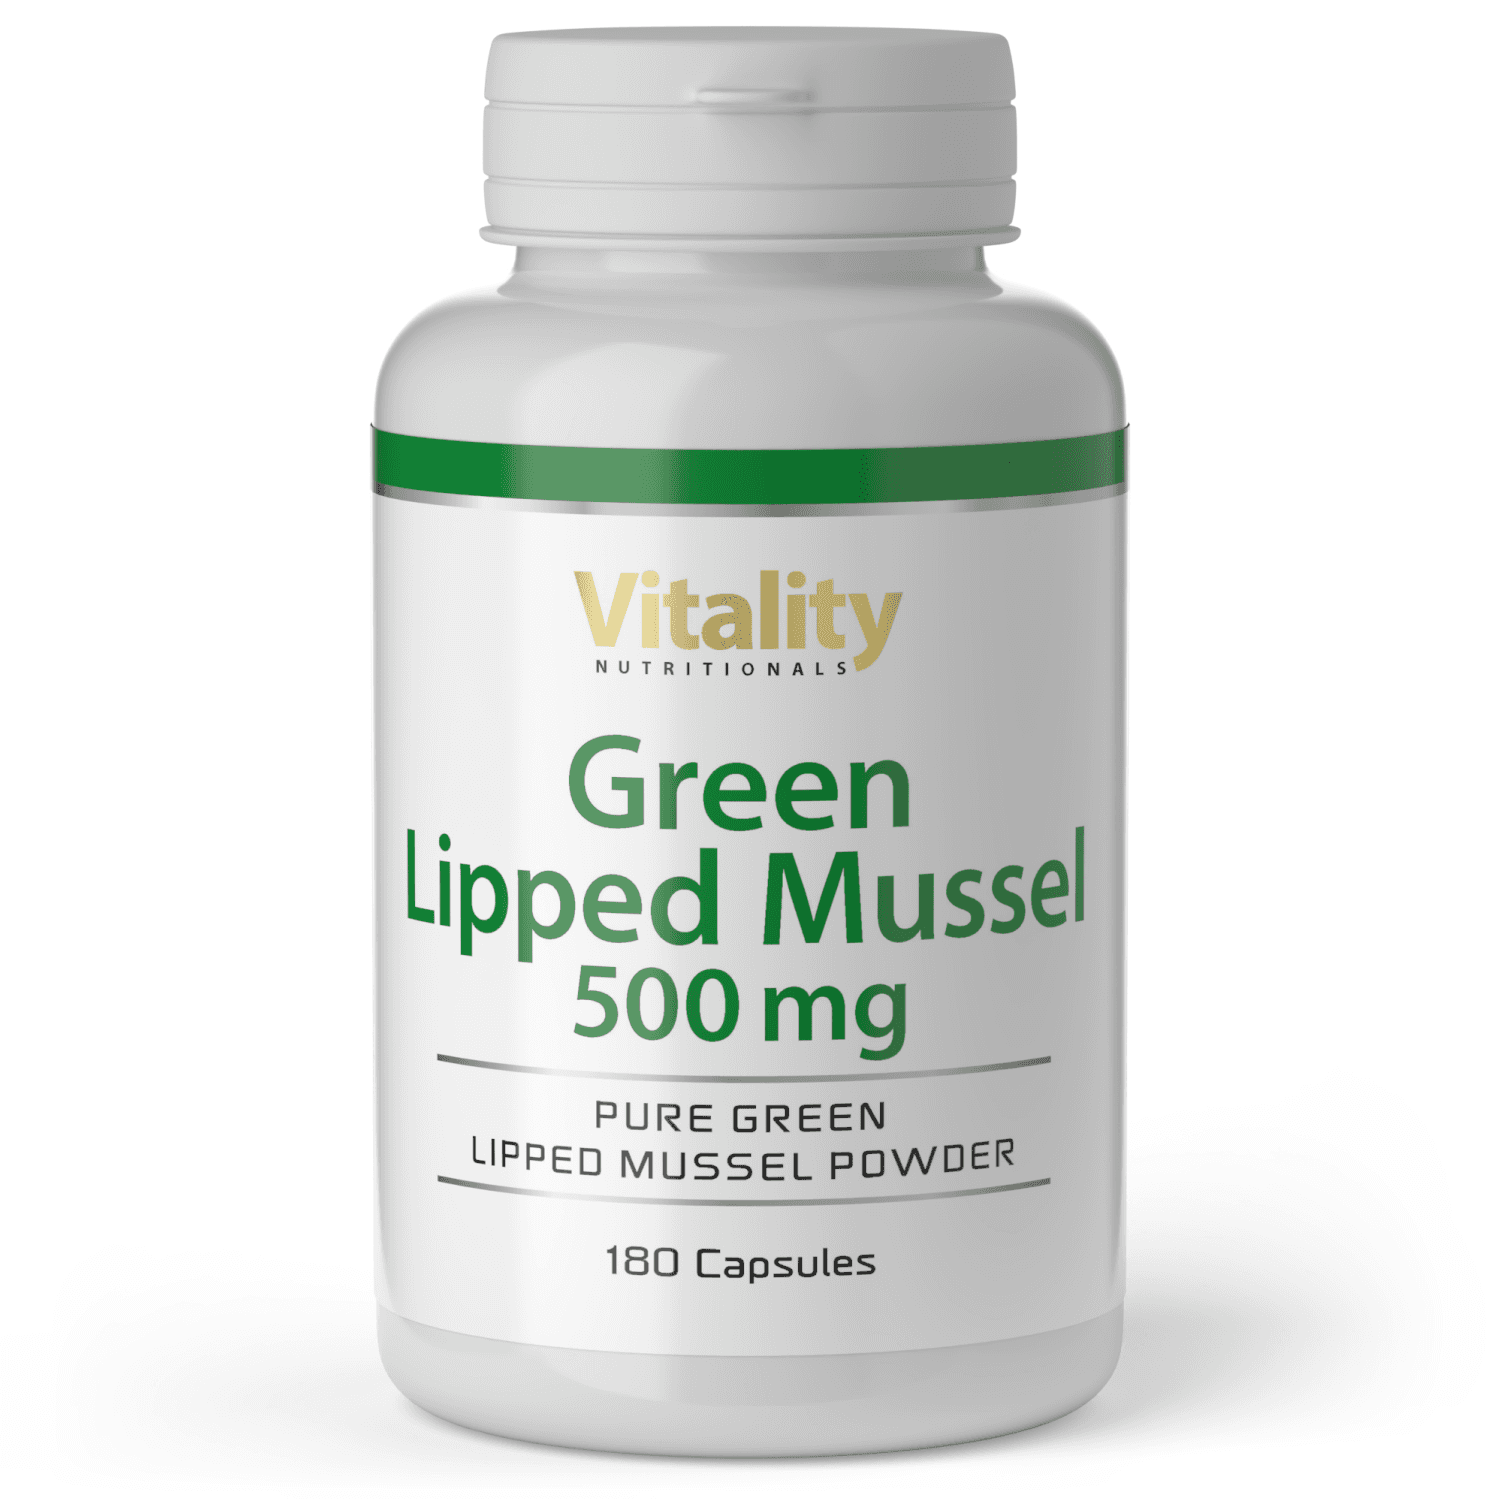 Green Lipped Mussel 500mg capsules